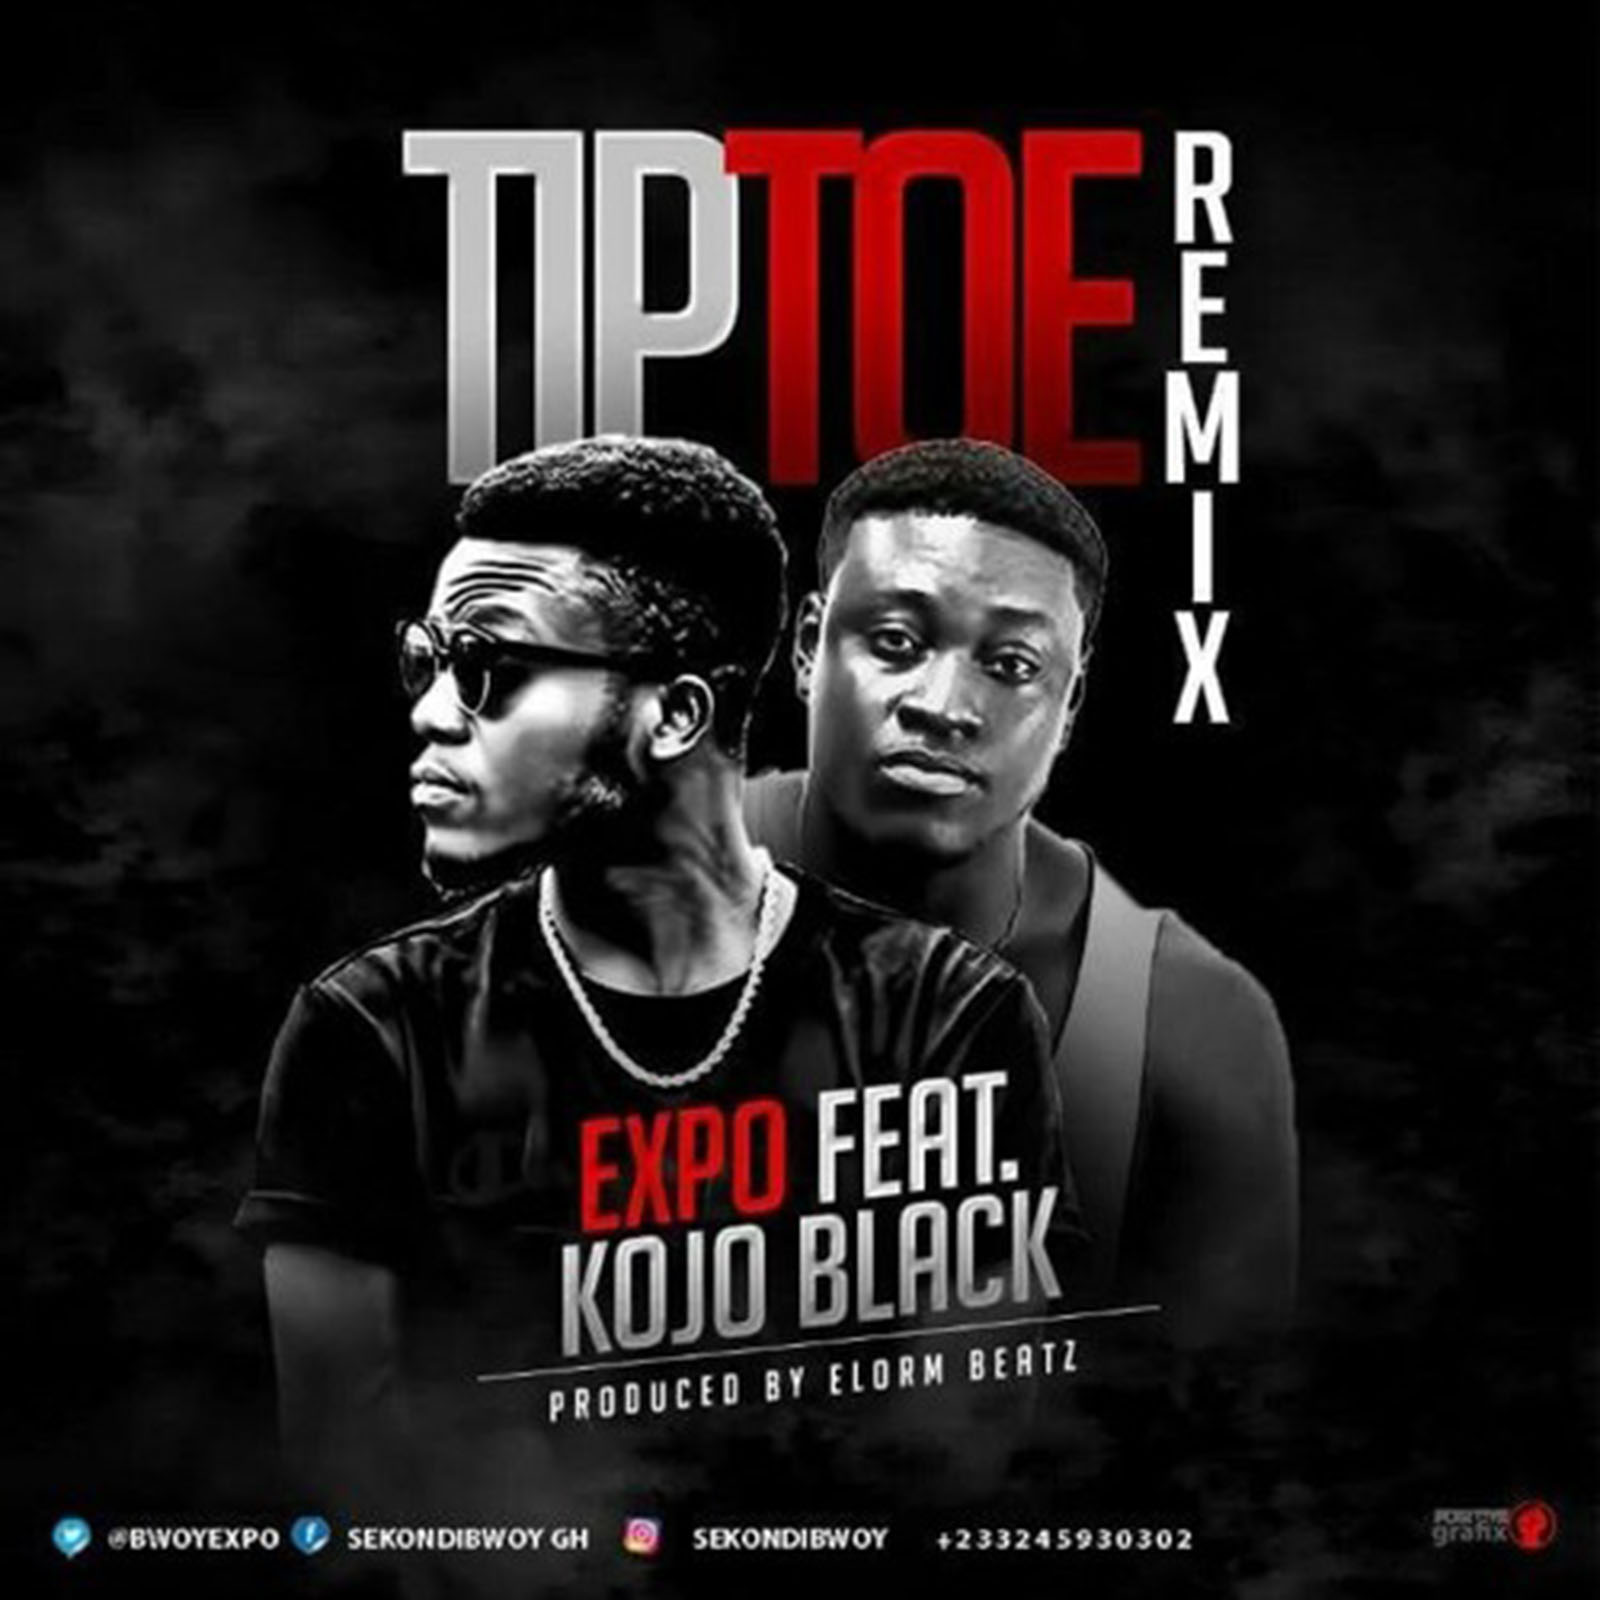 Tip Toe Remix by Expo feat. Kojo Black